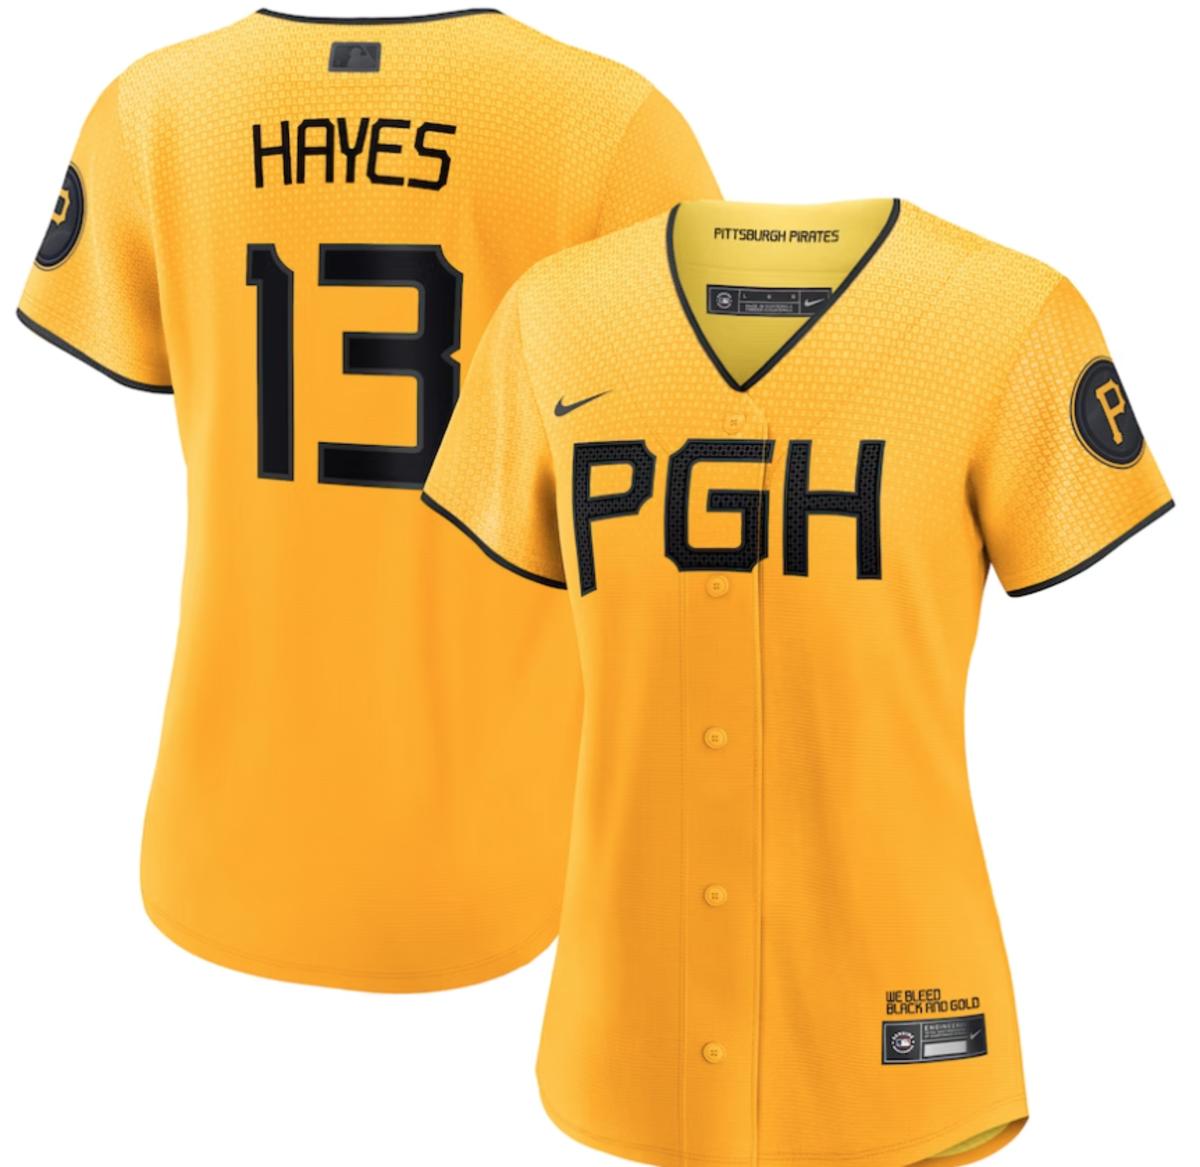 Pittsburgh Pirates City Connect Jerseys, Get your City Connect Jerseys,  Hats, and Other Apparel - FanNation